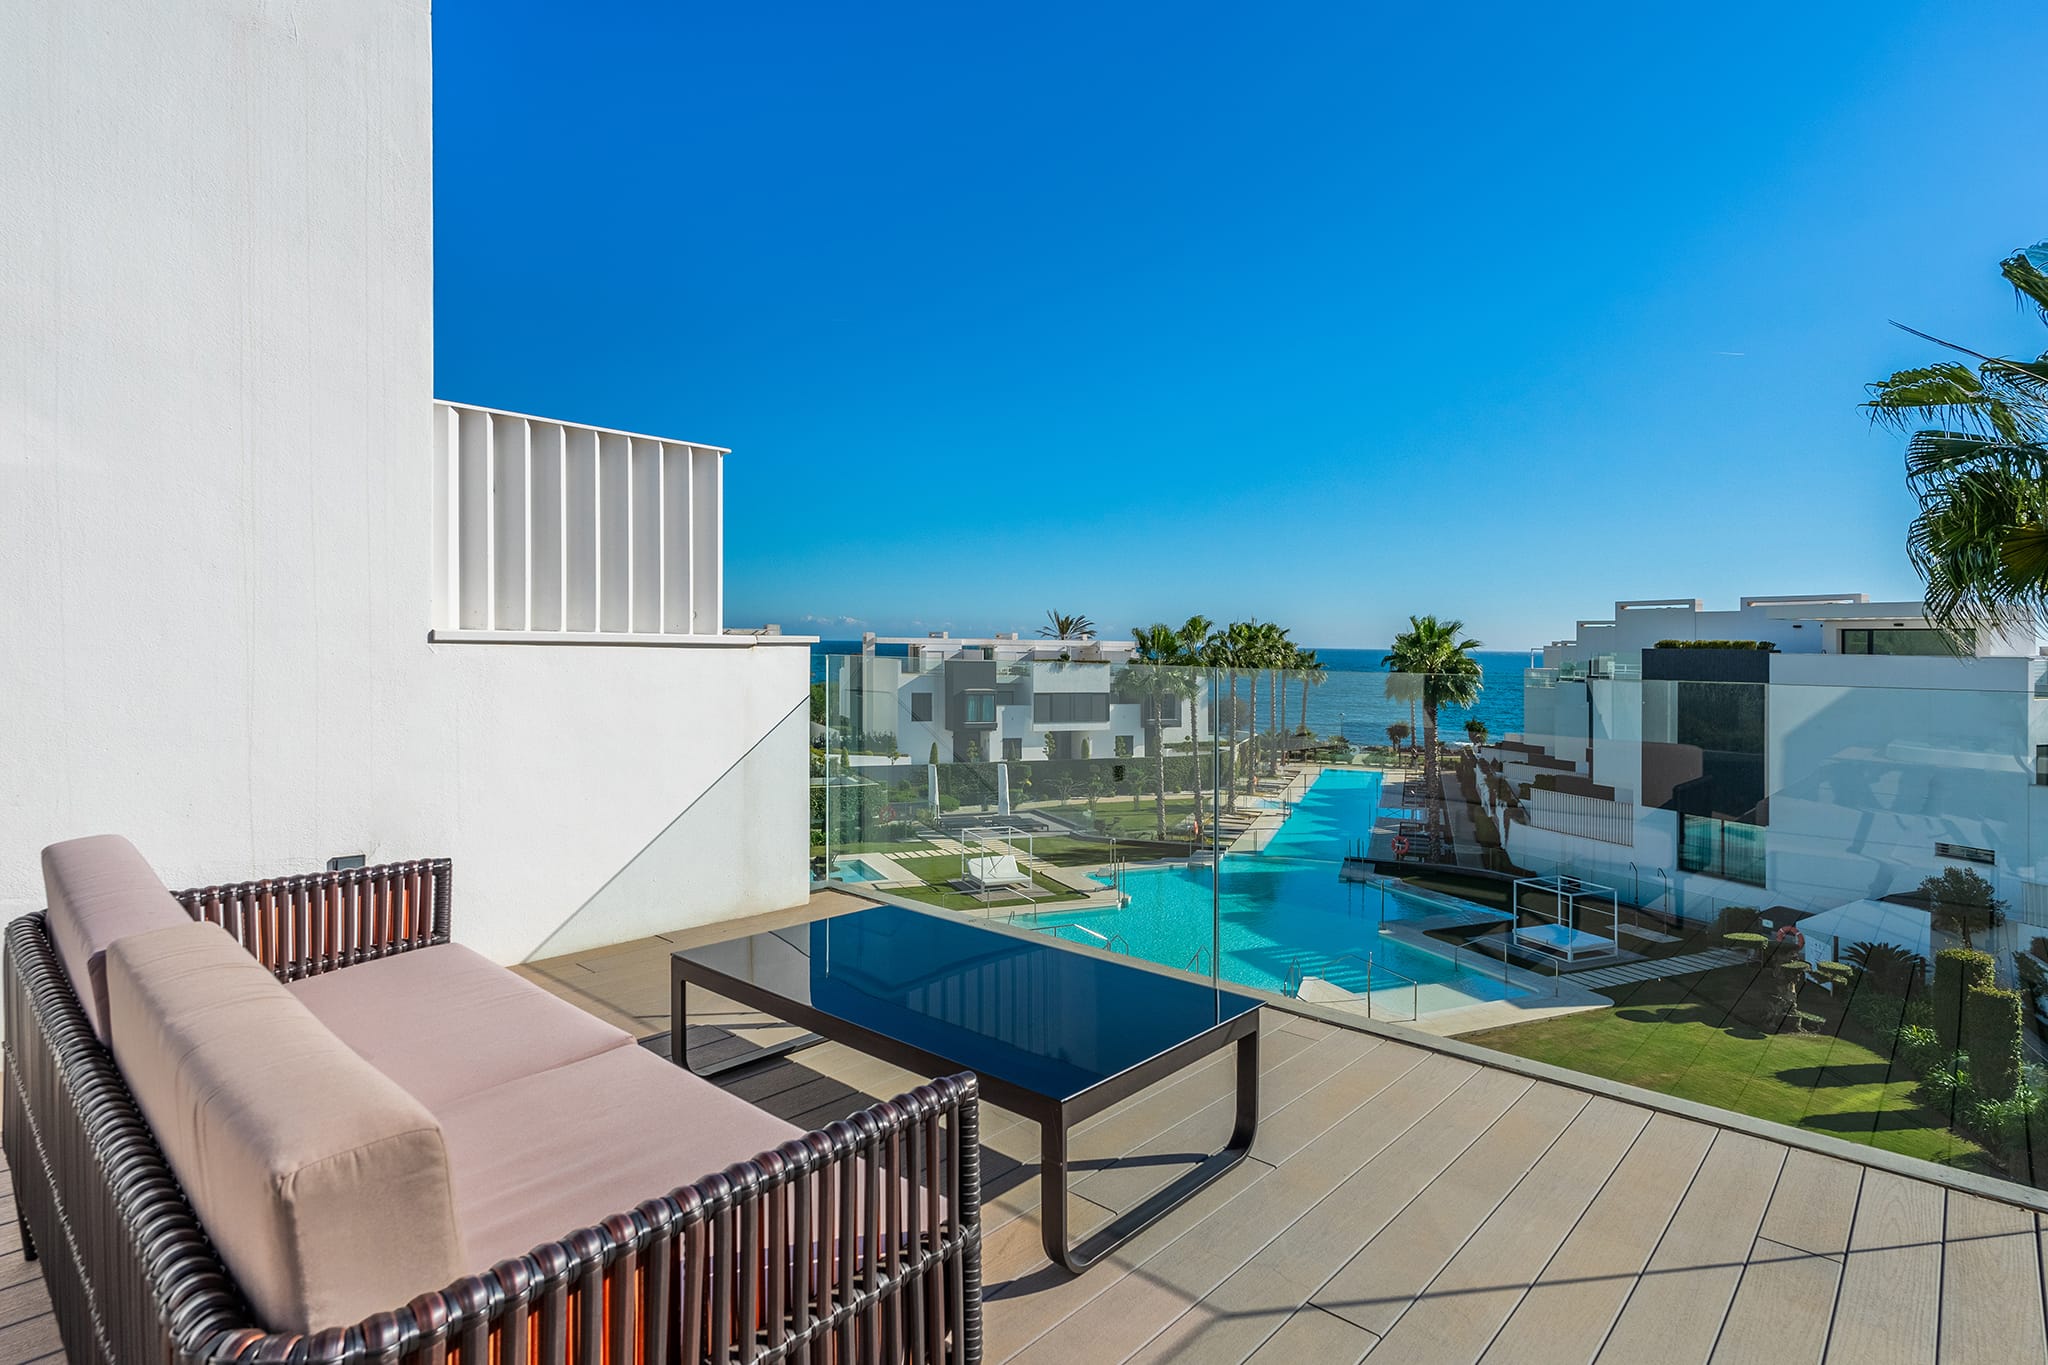 The Island, 4-bedroom seafront Townhouse, Estepona.